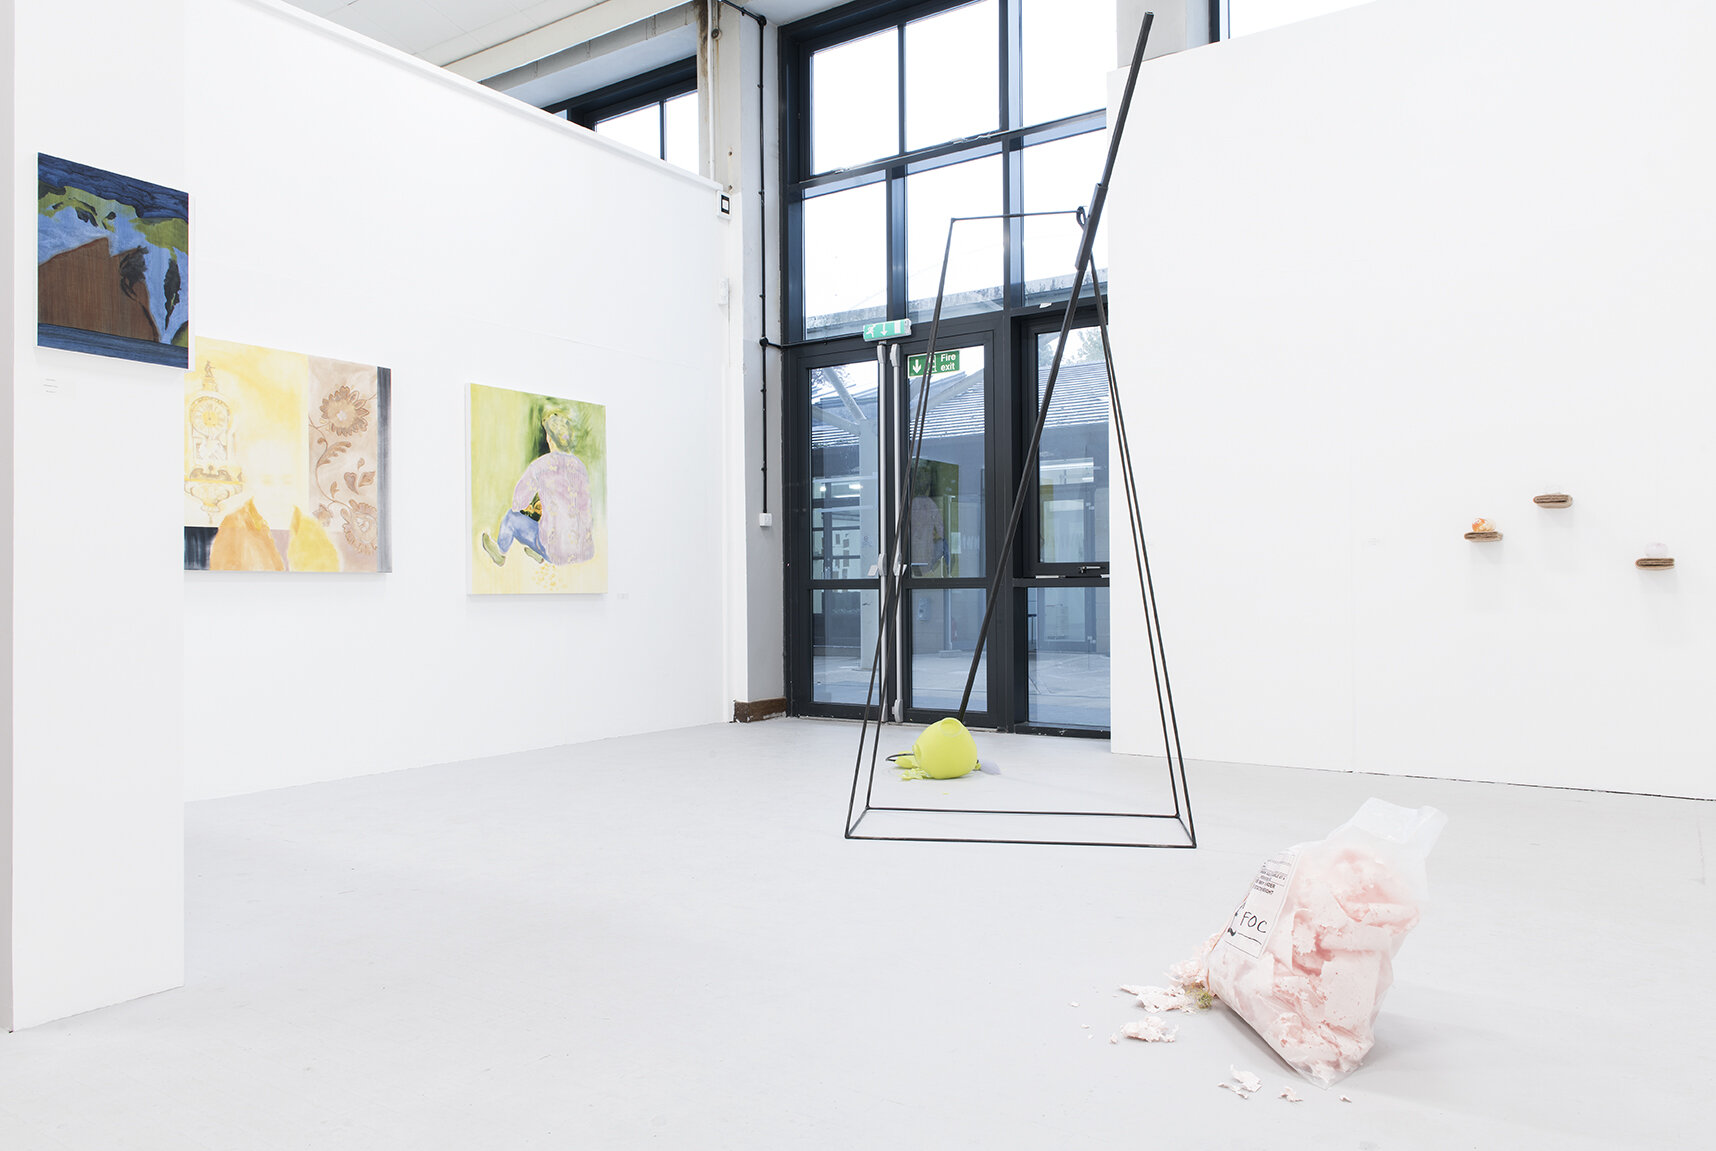  Kelly M O’Brien,  This May Be Under the Stated Weight (Aftermath) . MFA Degree Show installation view with Vicky McKay (left). Steel, glass, paper, thread, tulle, plastic. 230 x 350 x 122 cm ©2019 Image: John Taylor 